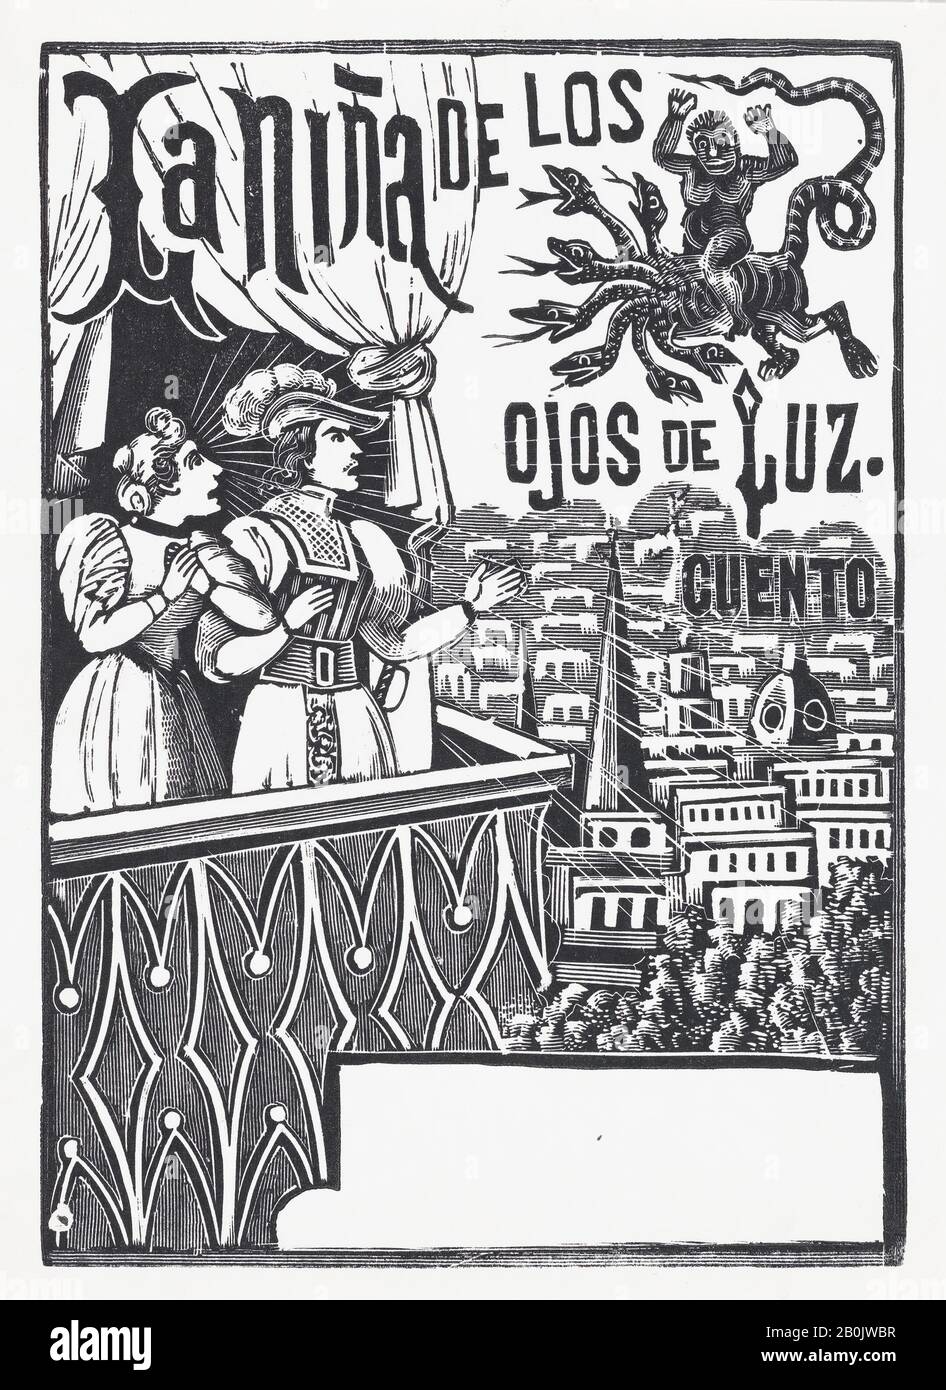 José Guadalupe Posada, A woman and a man standing on a balcony looking up at a flying monster in the sky, published by Antonio Vanegas Arroyo, José Guadalupe Posada (Mexican, 1851–1913), ca. 1880–1910, Wood engraving, Sheet: 7 1/16 × 5 3/16 in. (18 × 13.2 cm), Image: 6 11/16 × 4 3/4 in. (17 × 12 cm), Prints Stock Photo